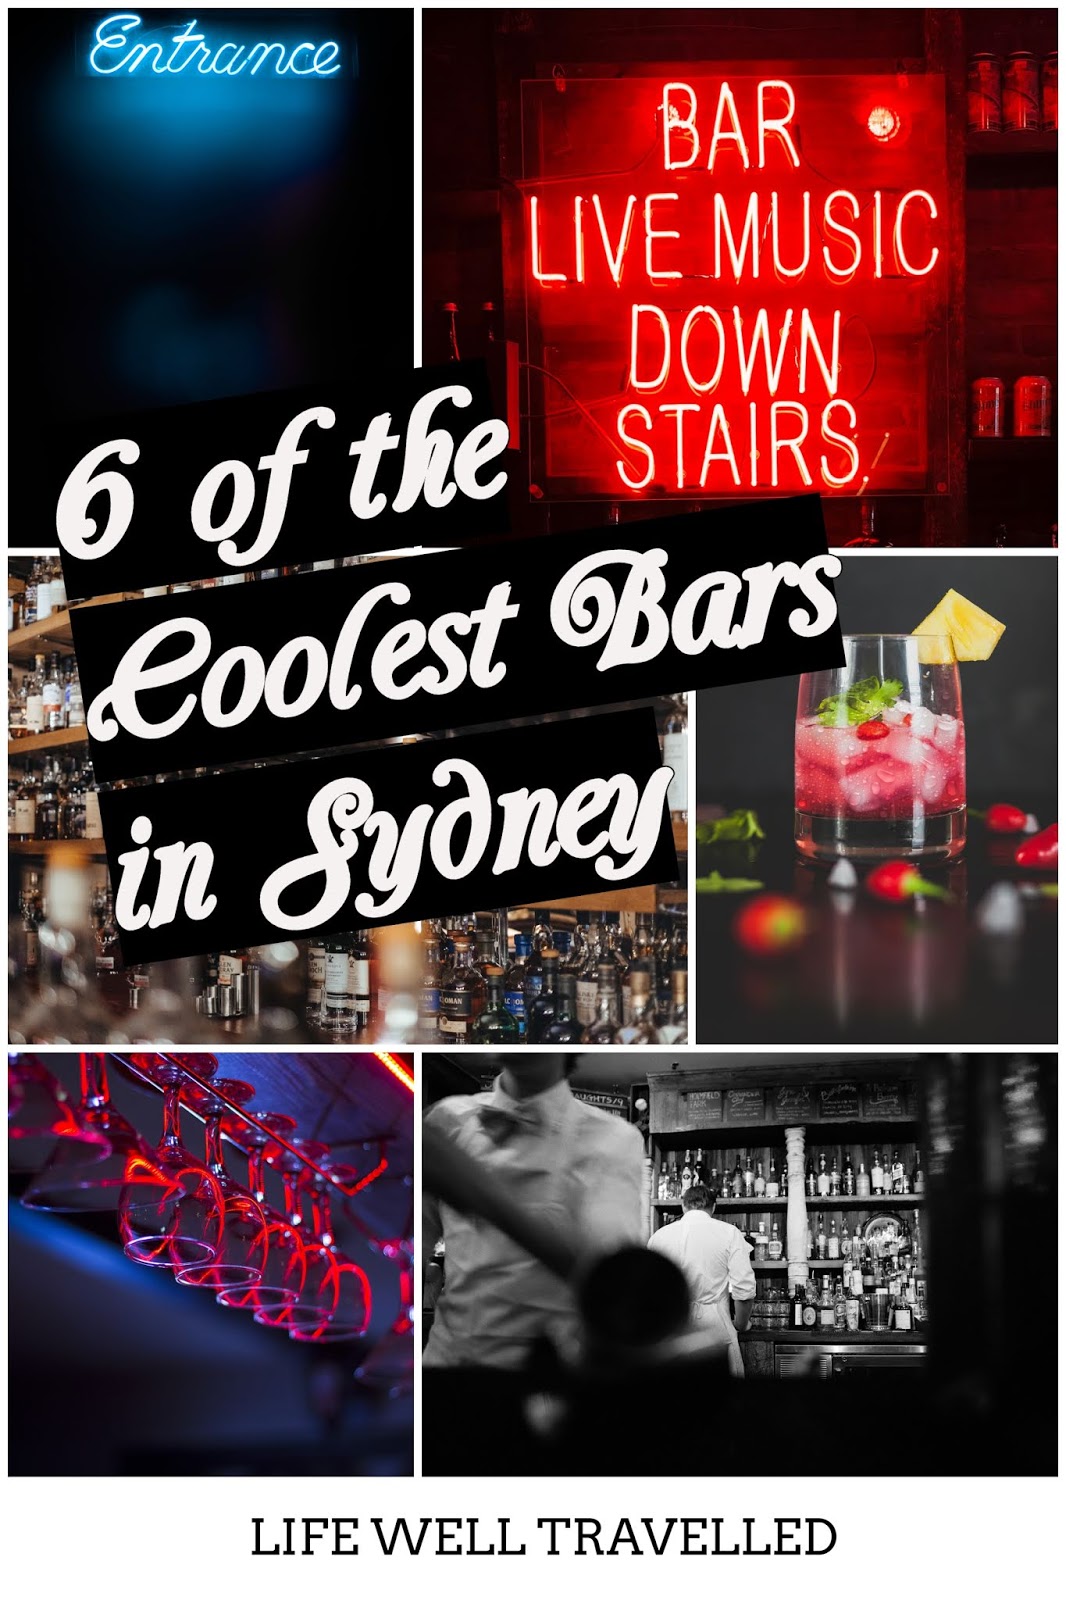 6 of the Coolest Bars in Sydney